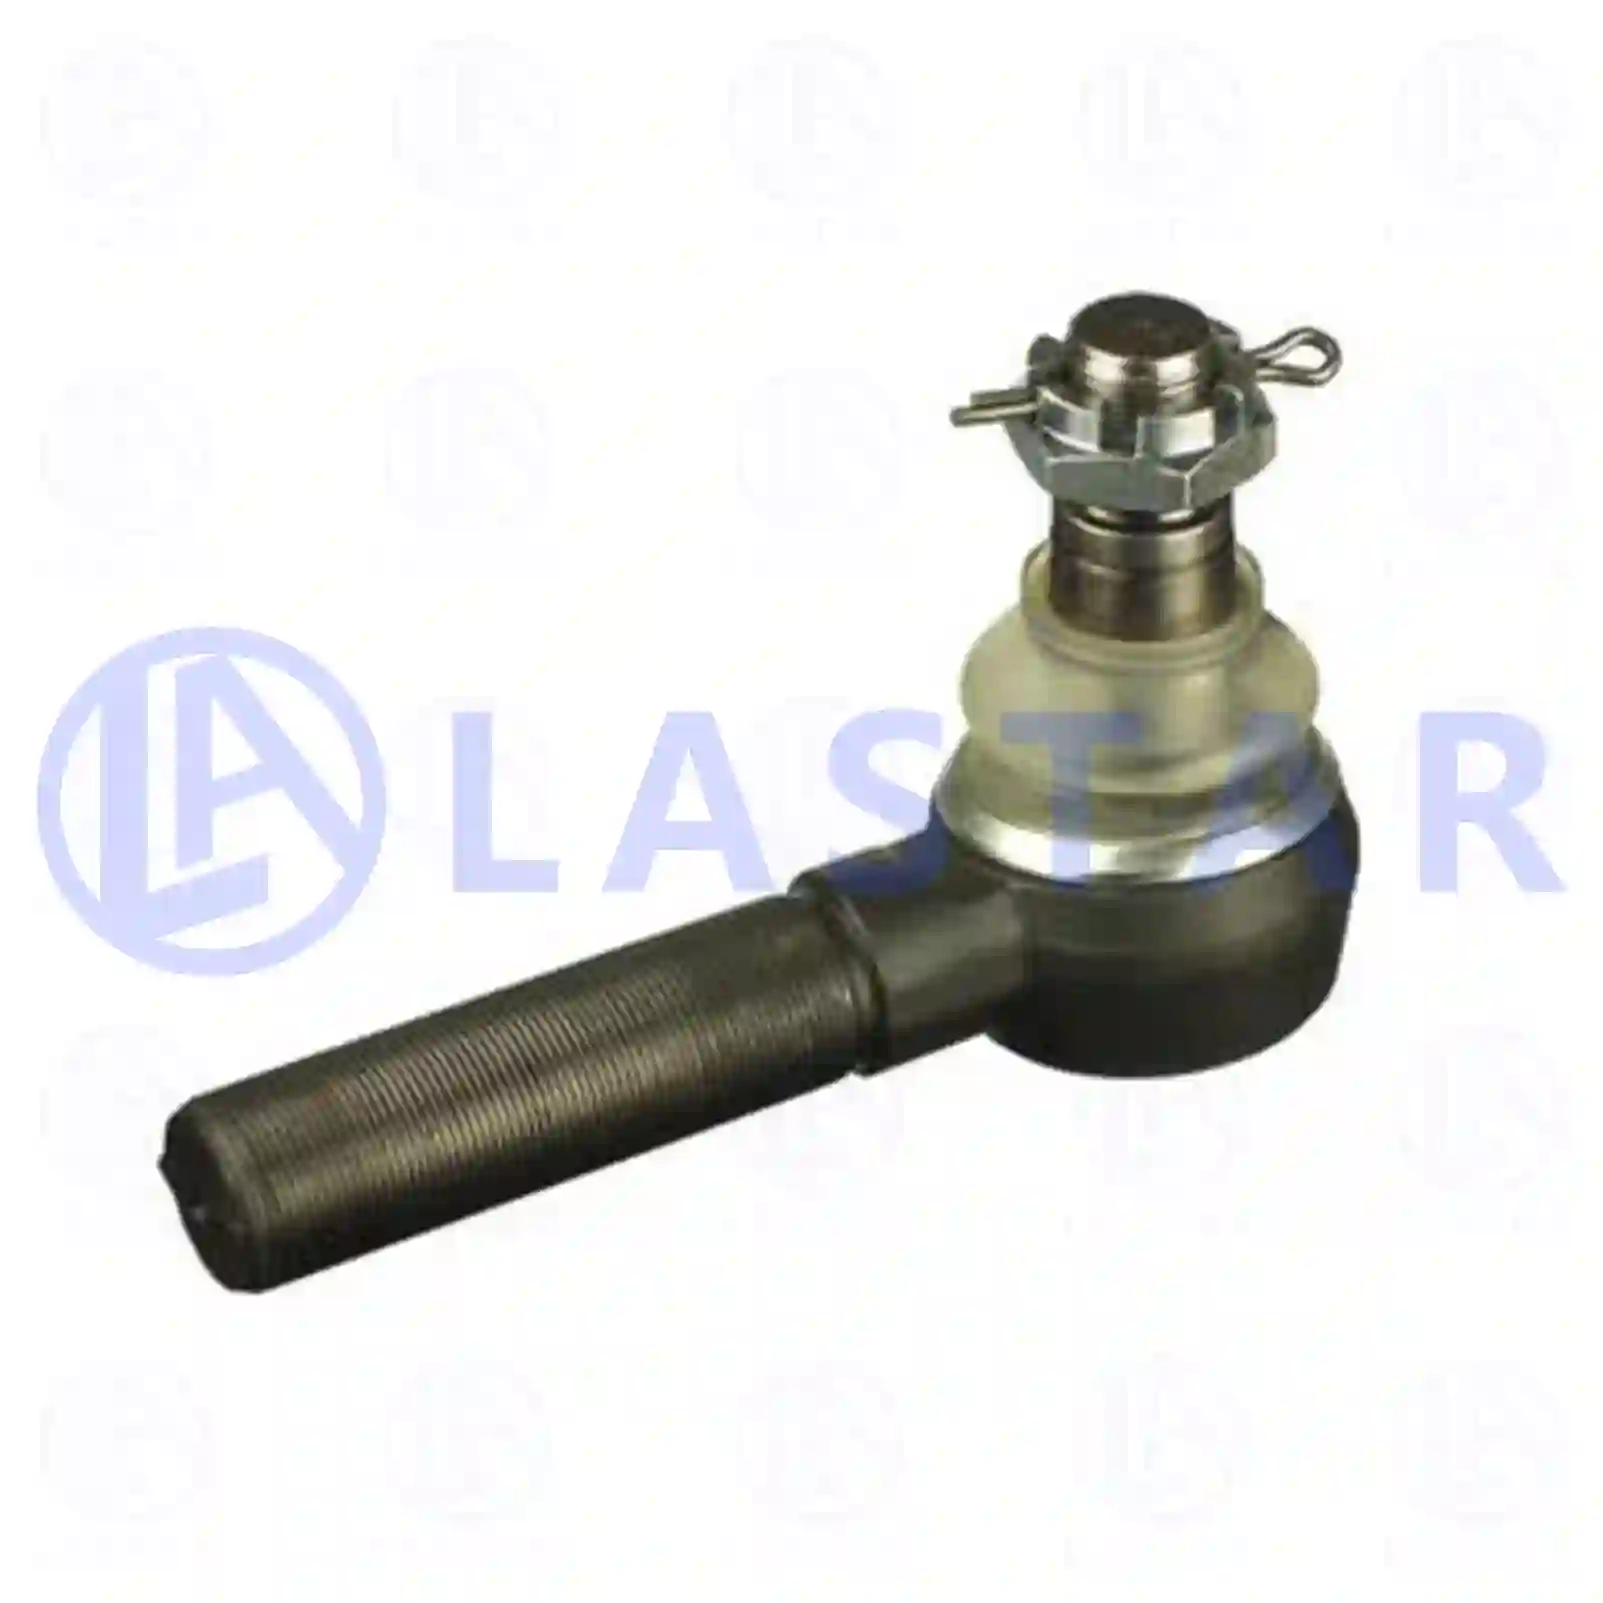 Ball joint, right hand thread, 77705716, 81953016263, 6994601648, ZG40382-0008, , , ||  77705716 Lastar Spare Part | Truck Spare Parts, Auotomotive Spare Parts Ball joint, right hand thread, 77705716, 81953016263, 6994601648, ZG40382-0008, , , ||  77705716 Lastar Spare Part | Truck Spare Parts, Auotomotive Spare Parts